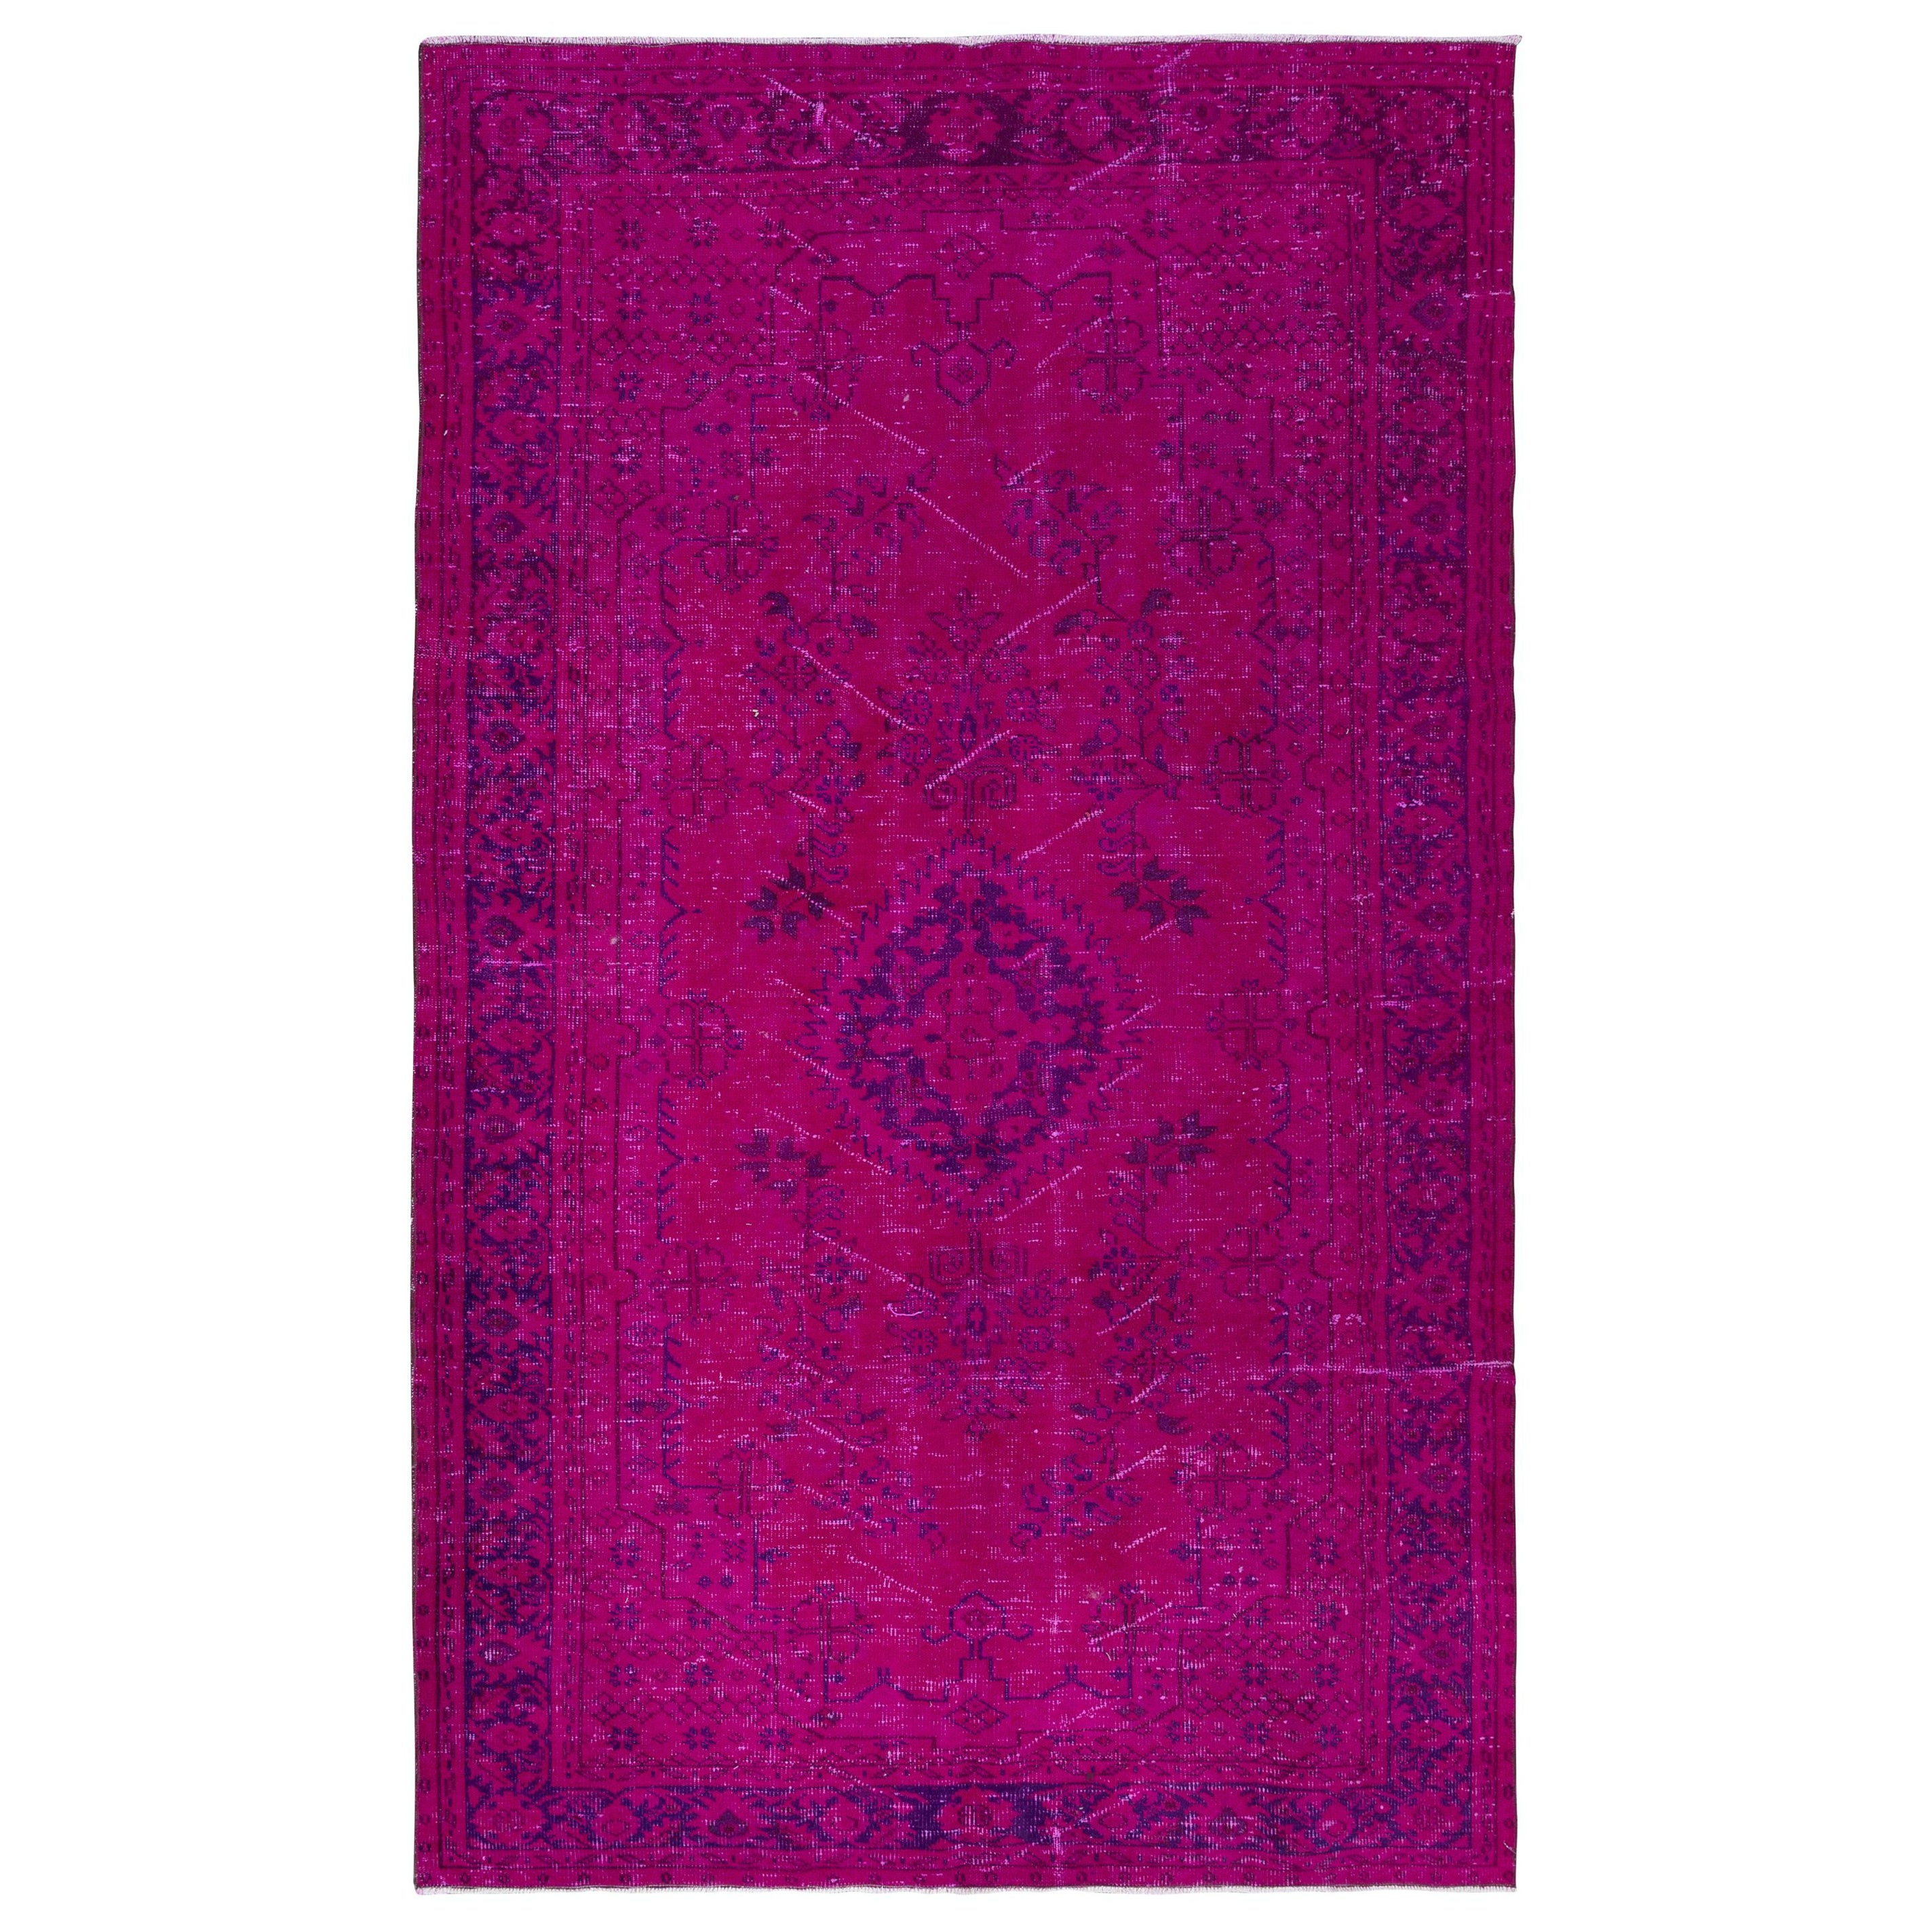 6x9.8 Ft Contemporary Pink Area Rug, Handmade in Turkey, Living Room Carpet